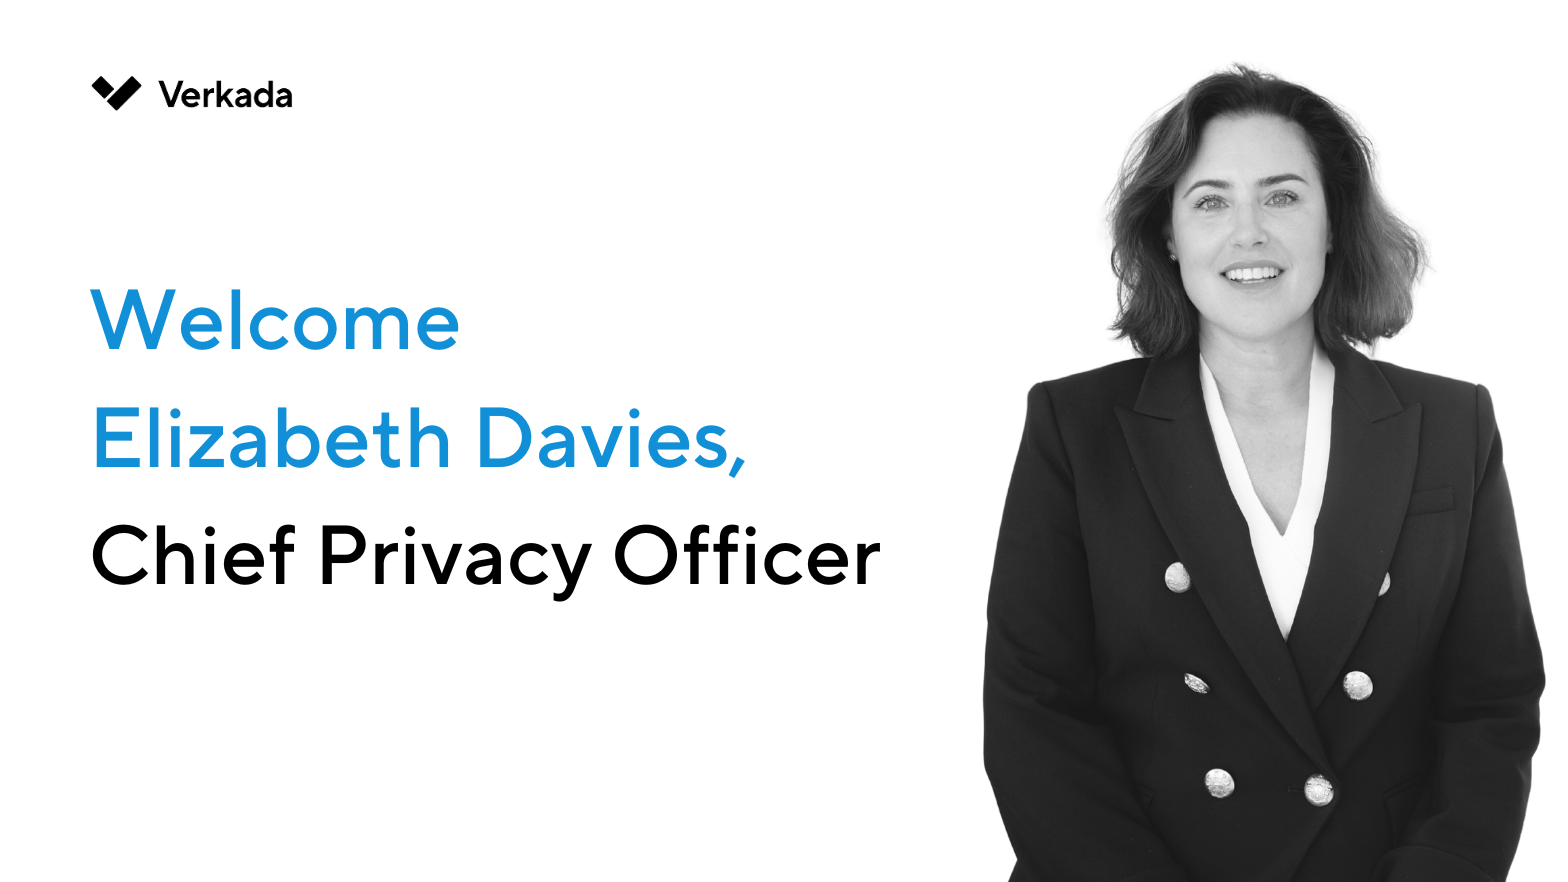 We are thrilled to introduce Elizabeth Davies, Verkada's new Chief Privacy Officer. 